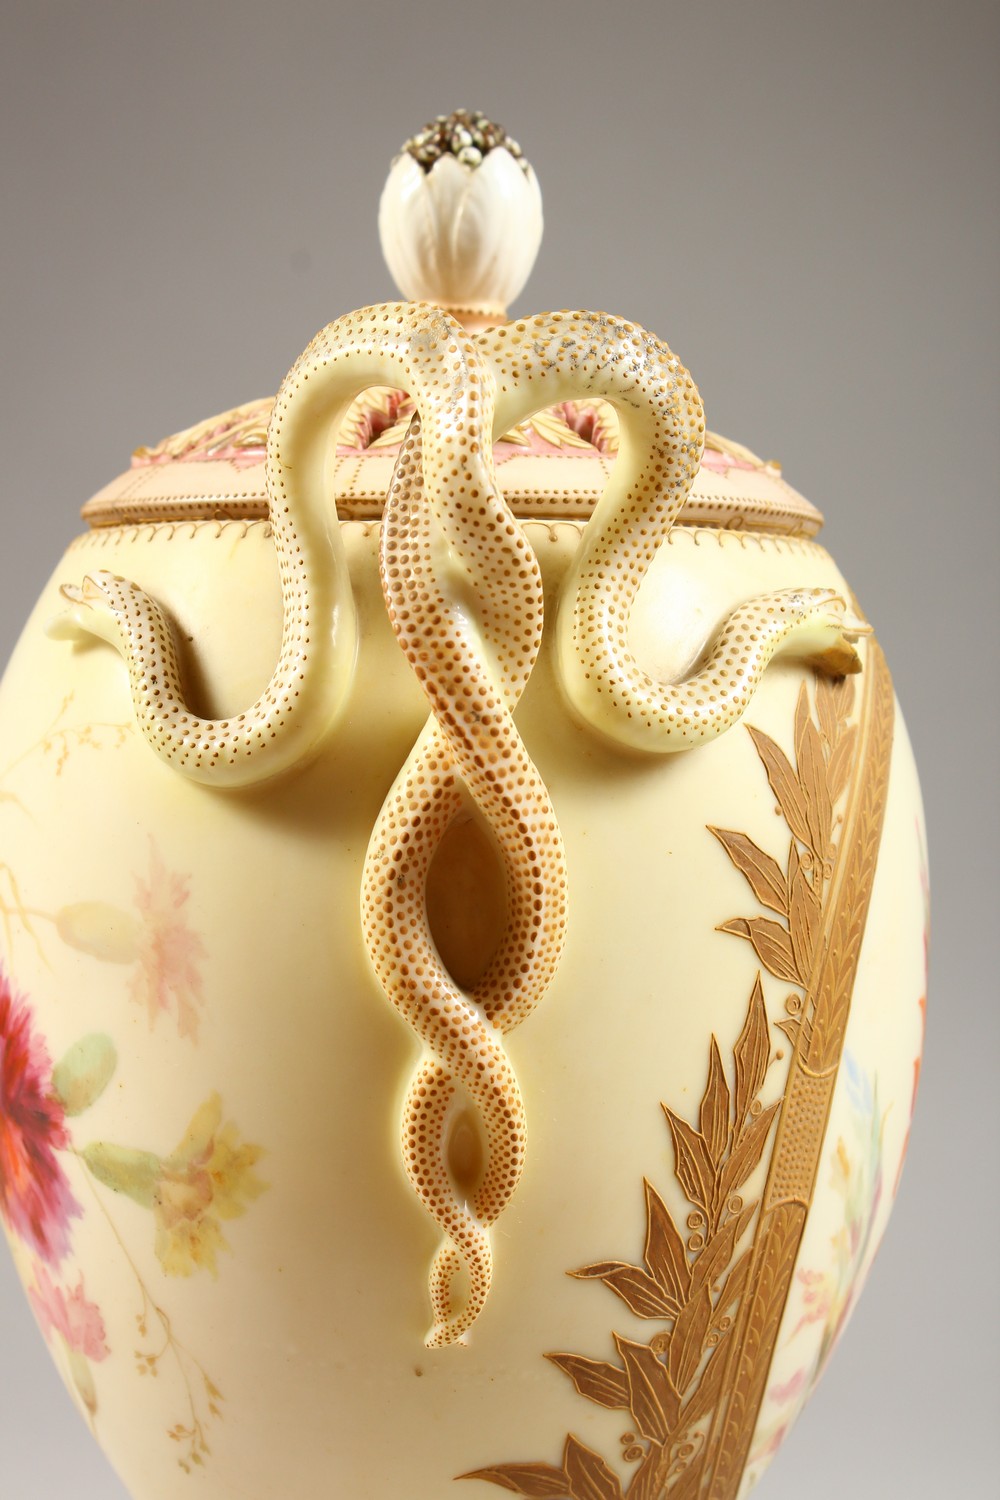 A BLUSH IVORY PORCELAIN TWIN HANDLED POT POURRI VASE, painted with floral sprays, serpentine handles - Image 5 of 7